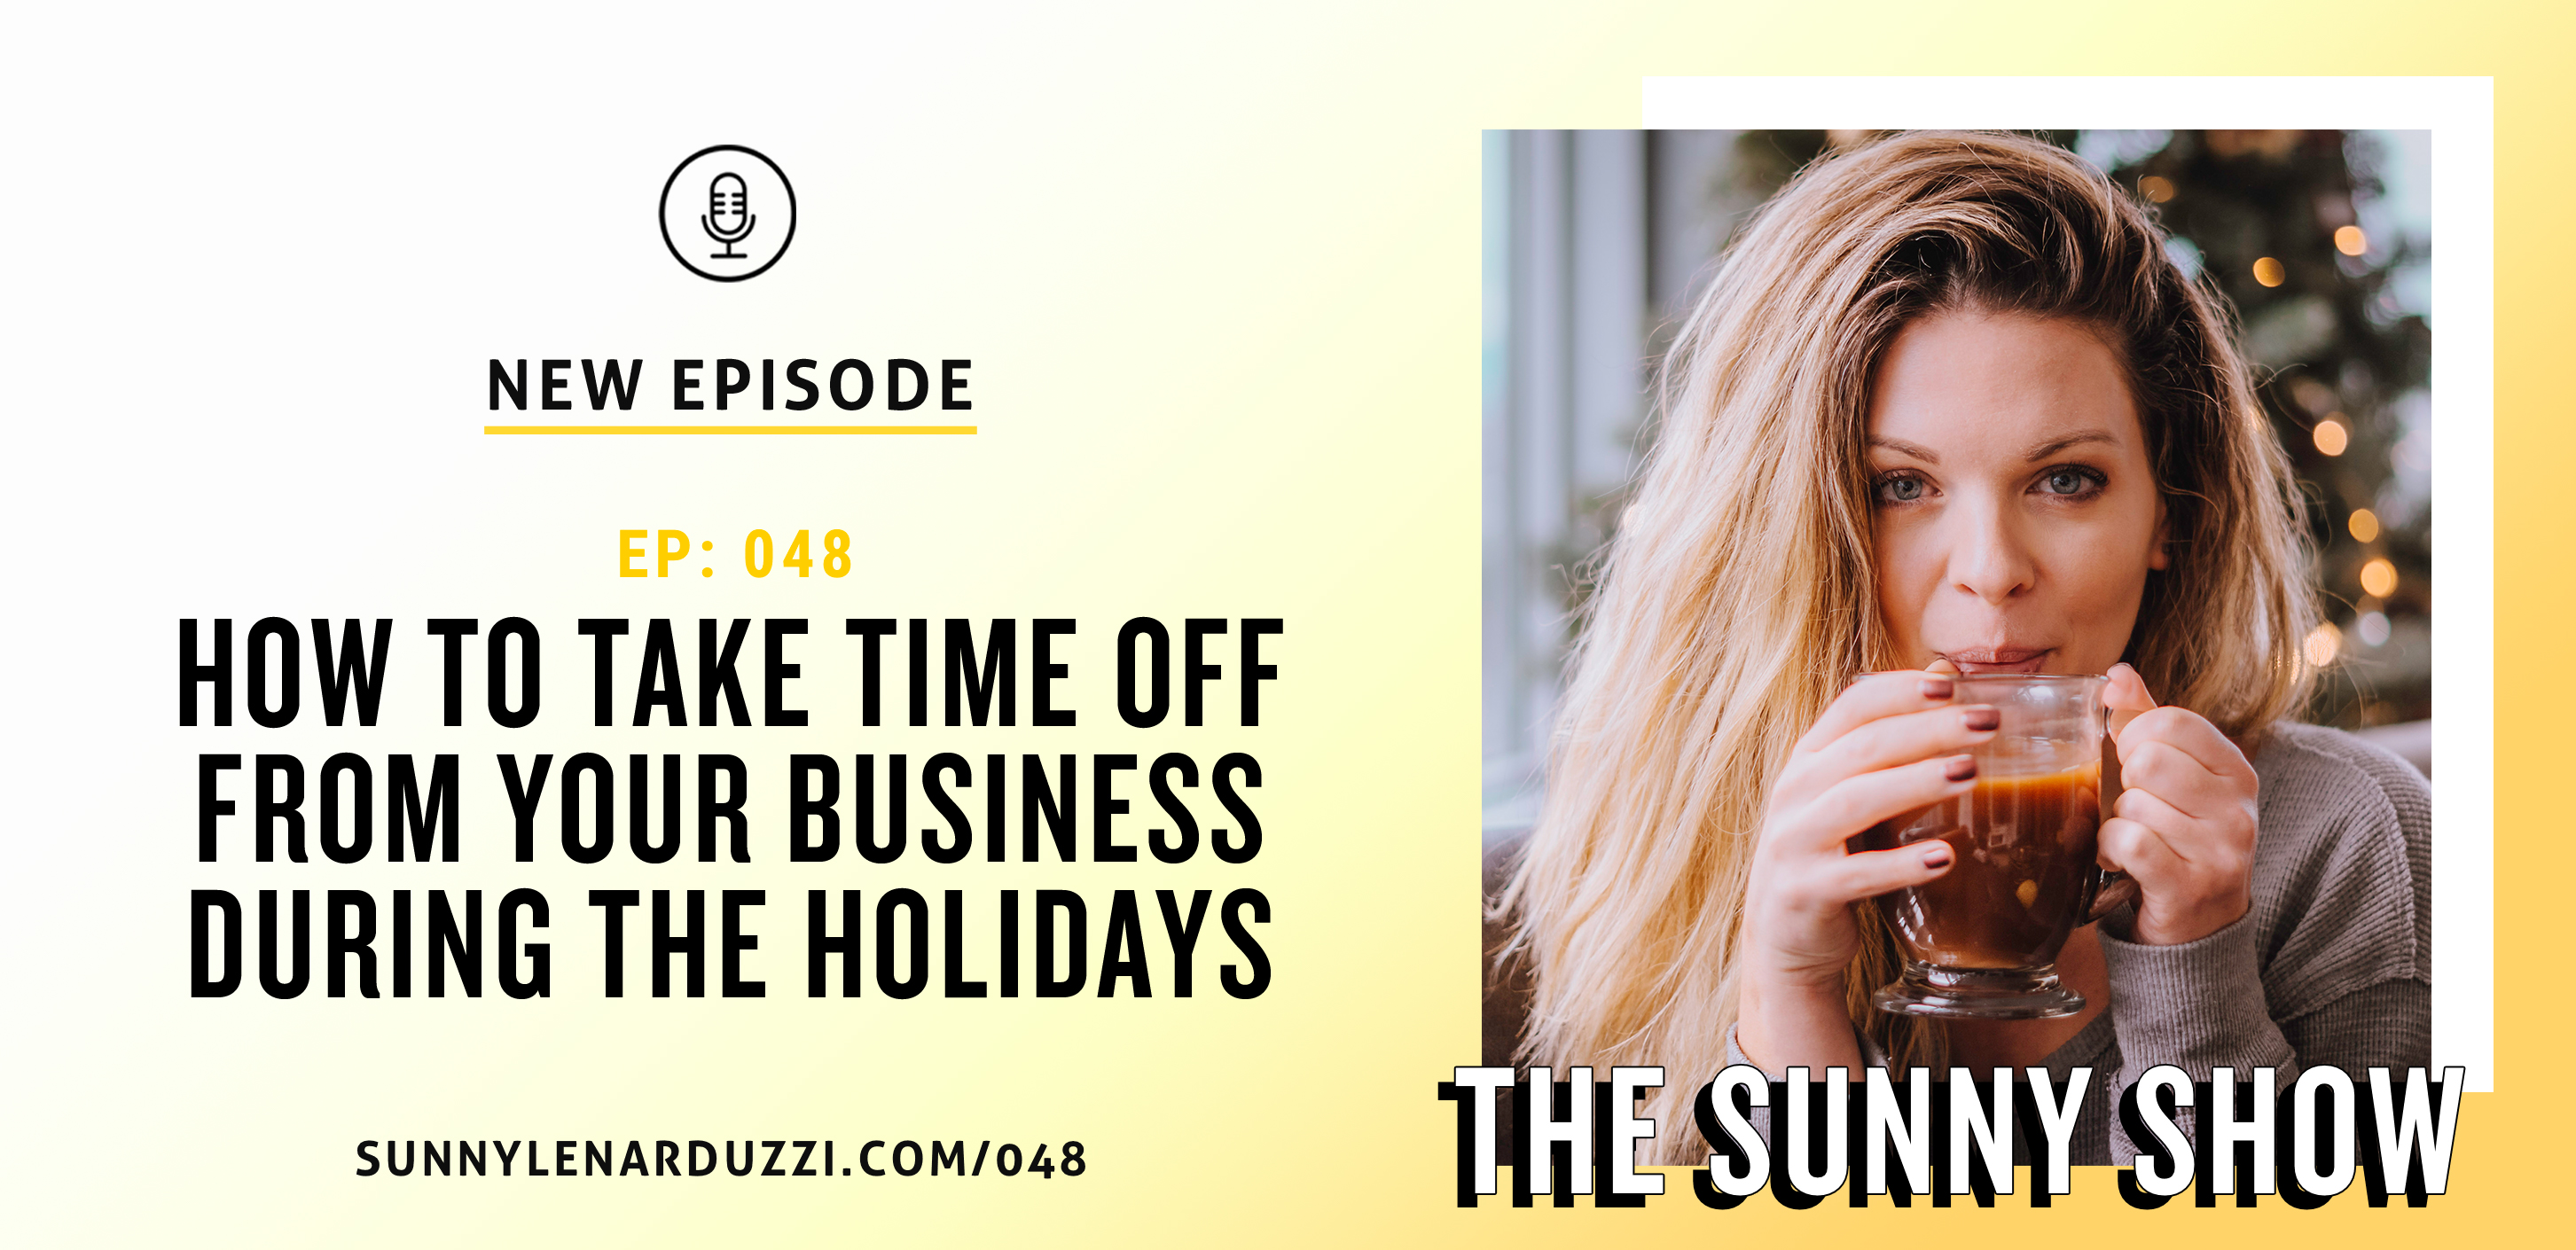 How to Take Time Off From Your Business During the Holidays